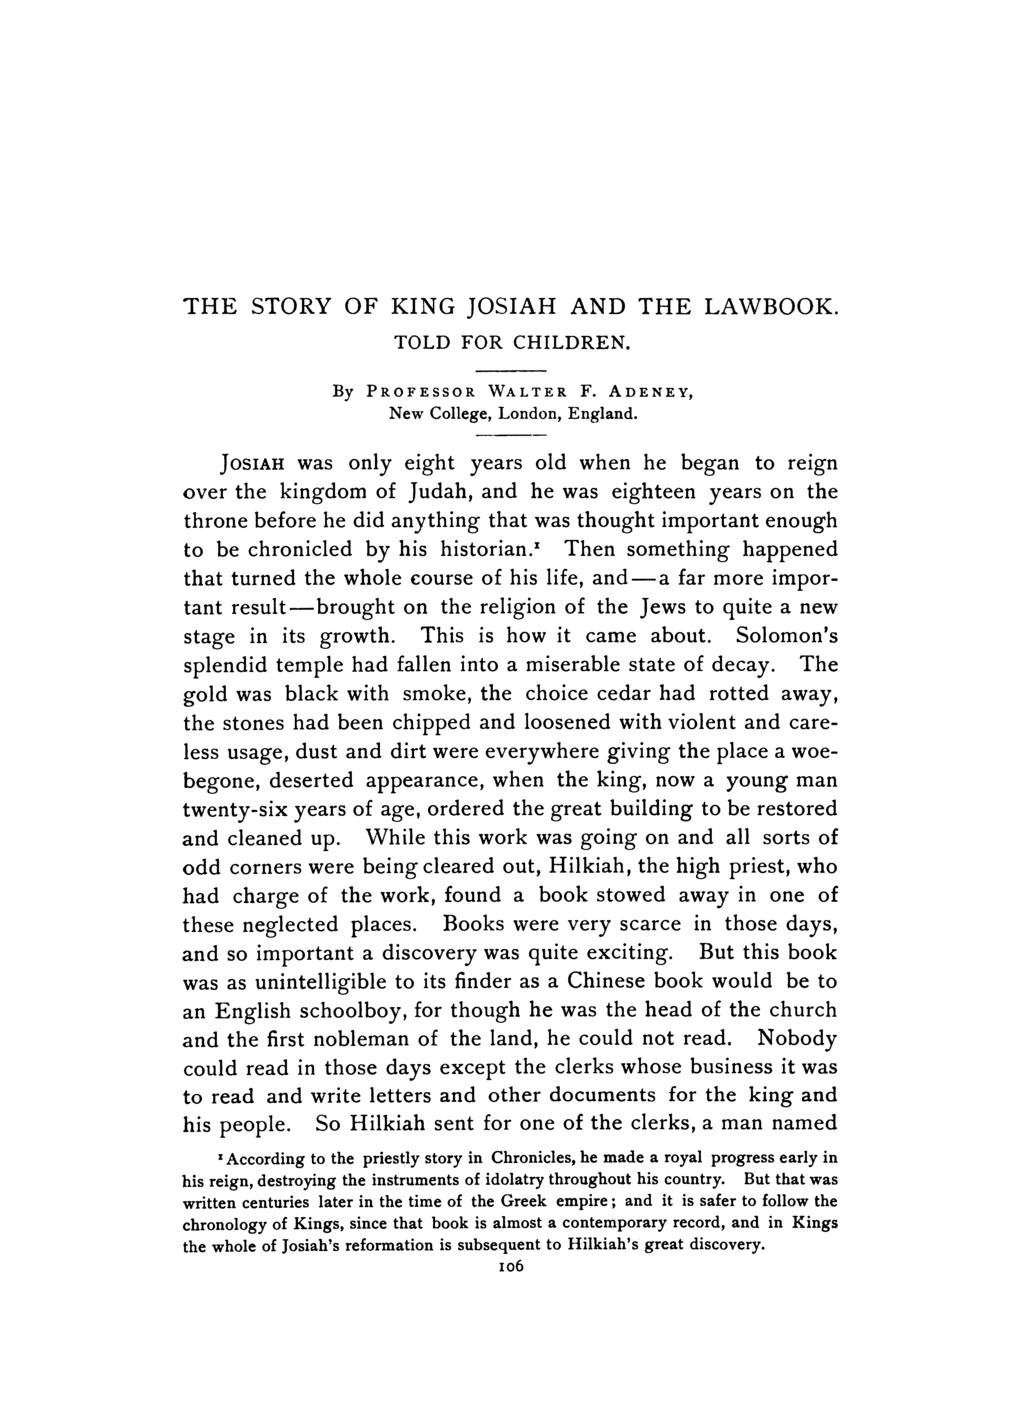 THE STORY OF KING JOSIAH AND THE LAWBOOK. TOLD FOR CHILDREN. By PROFESSOR WALTER F. ADENEY, New College, London, England.